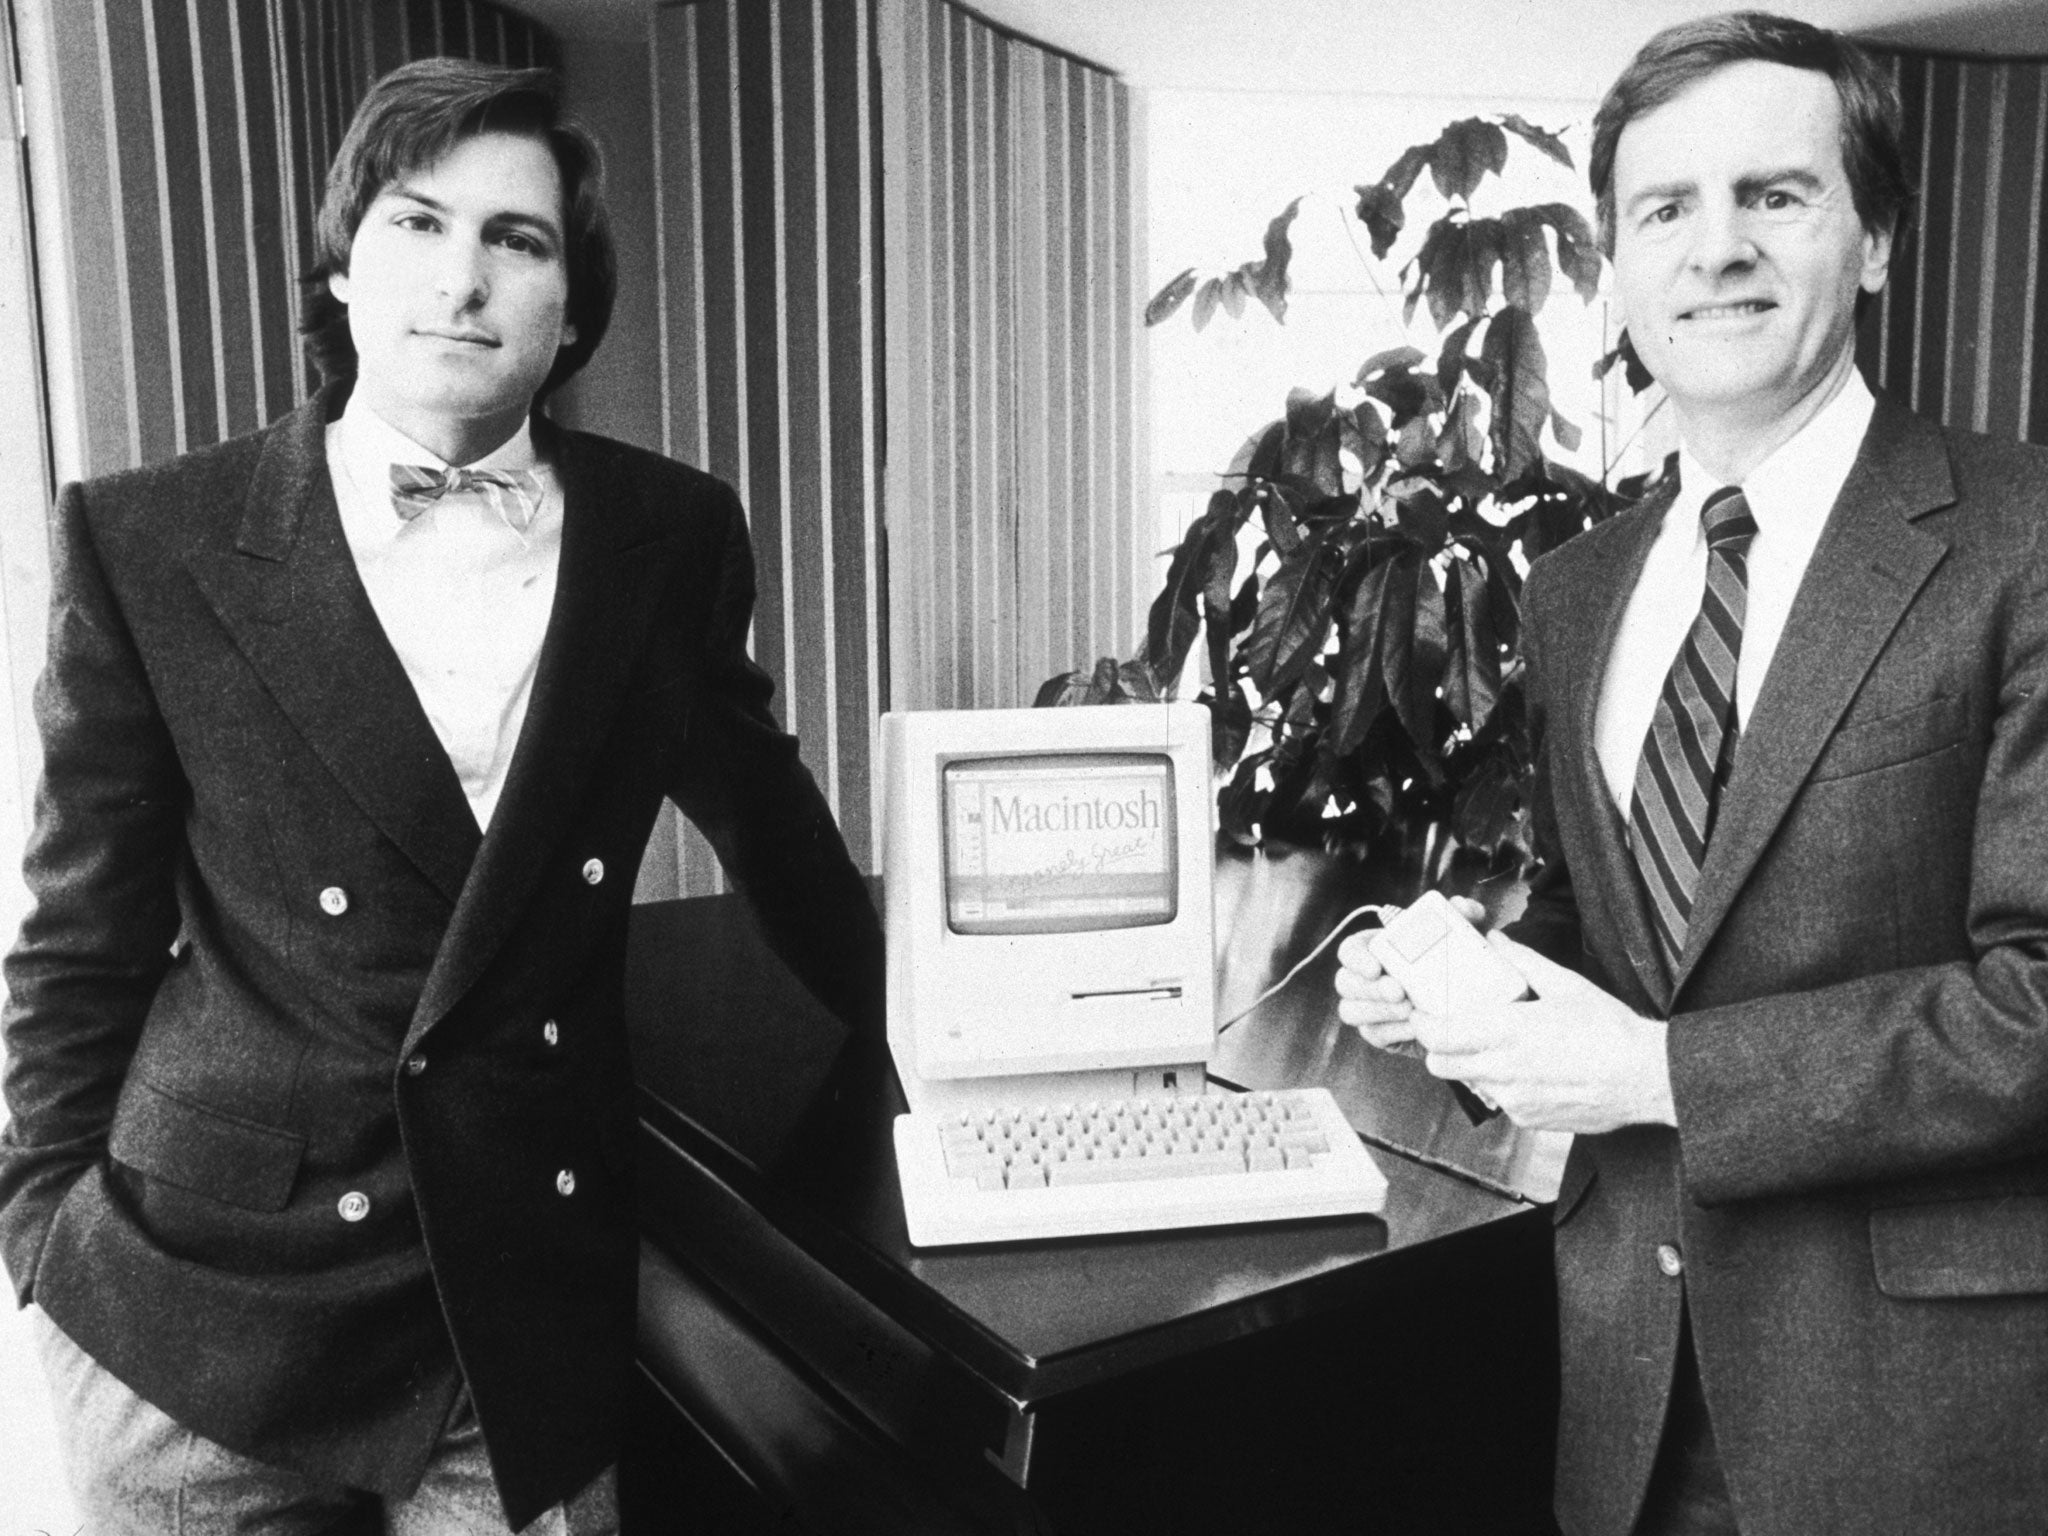 Perfect pitch: Steve Jobs, left, and Apple's president John Sculley with the new Macintosh personal computer in New York in 1984